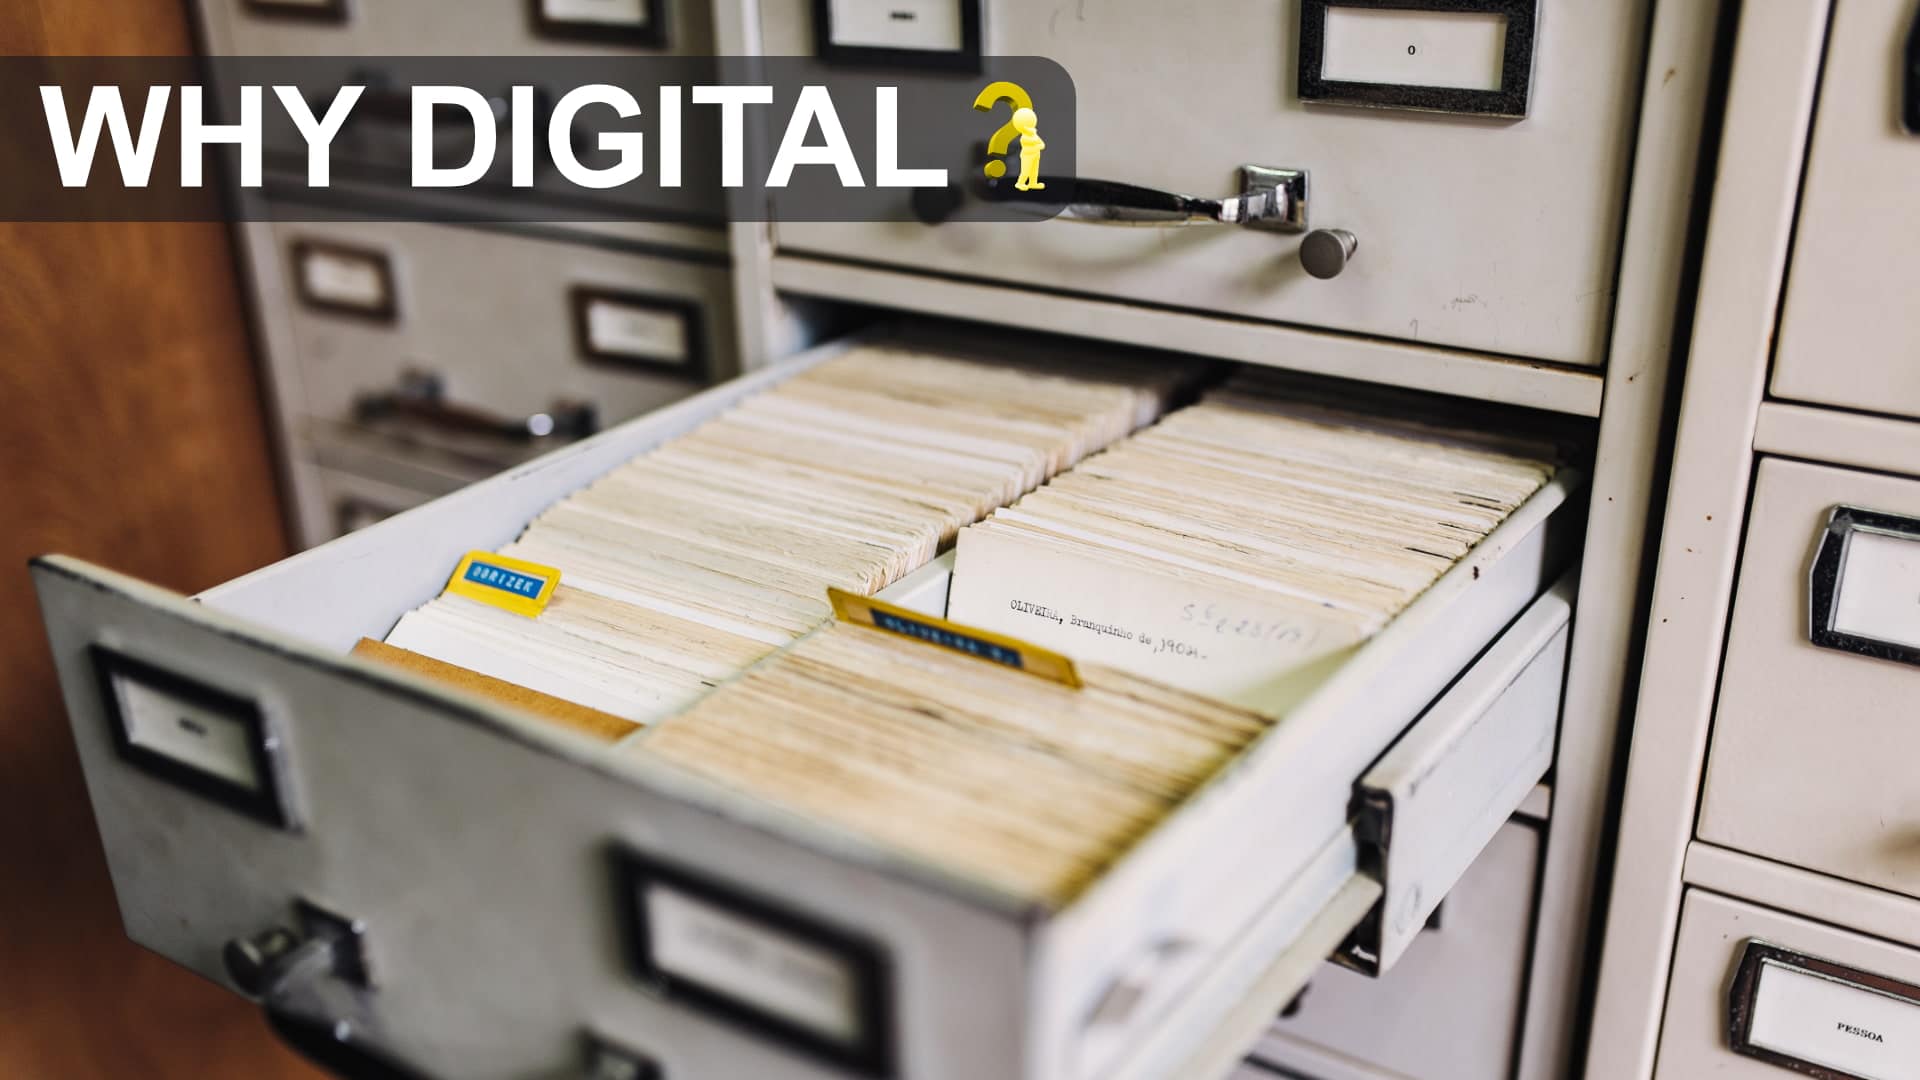 Why digitize your workflow?